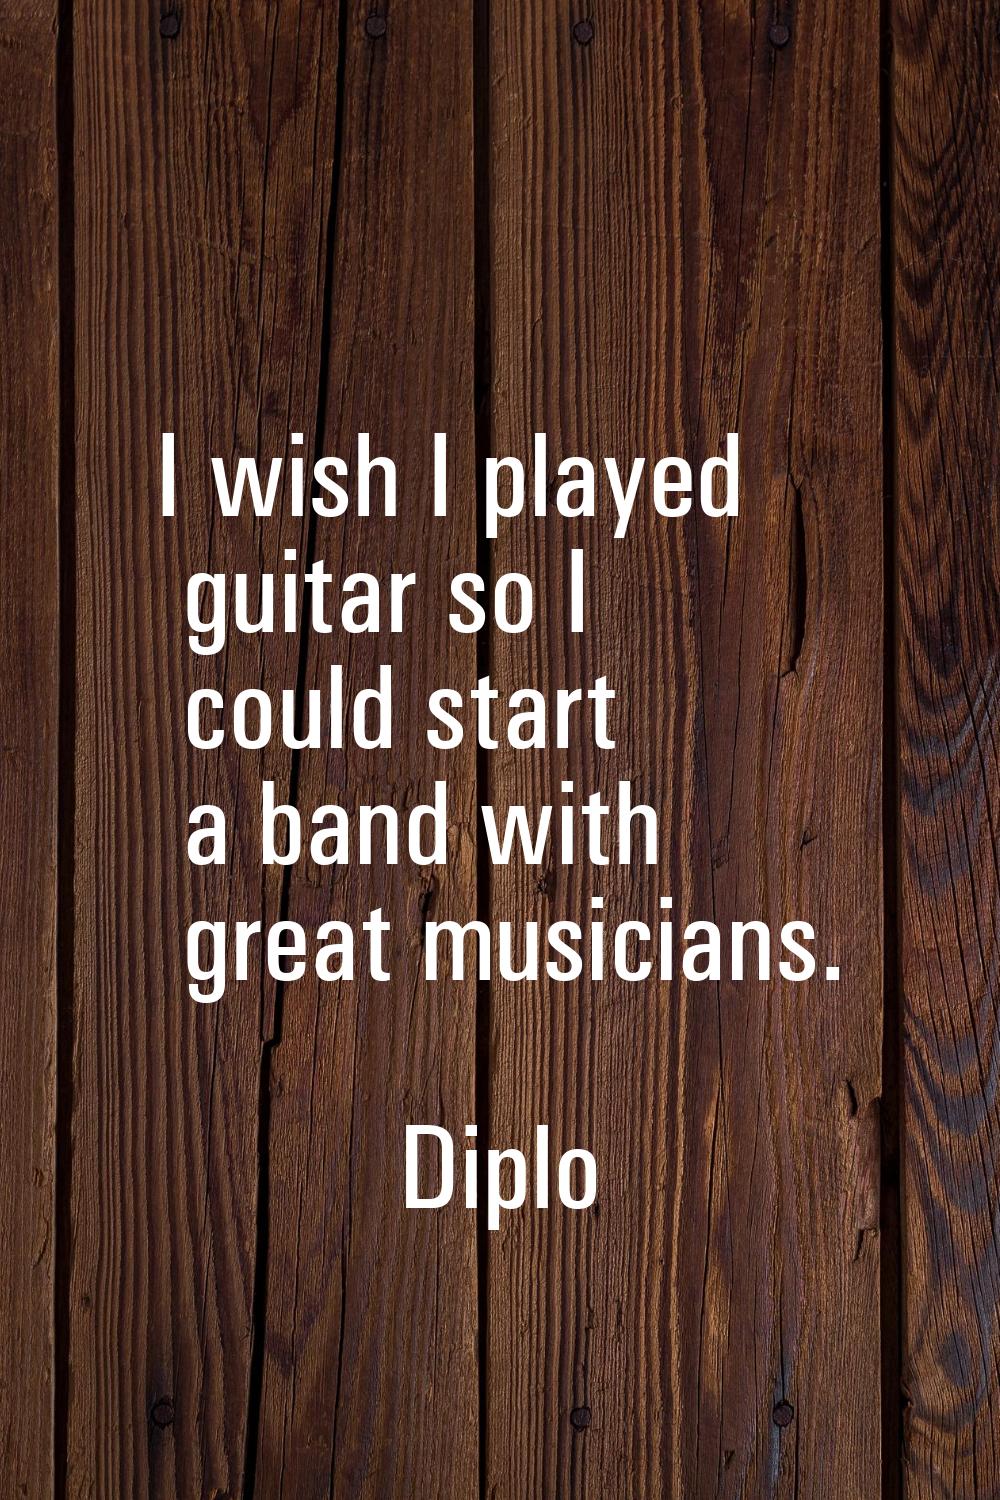 I wish I played guitar so I could start a band with great musicians.